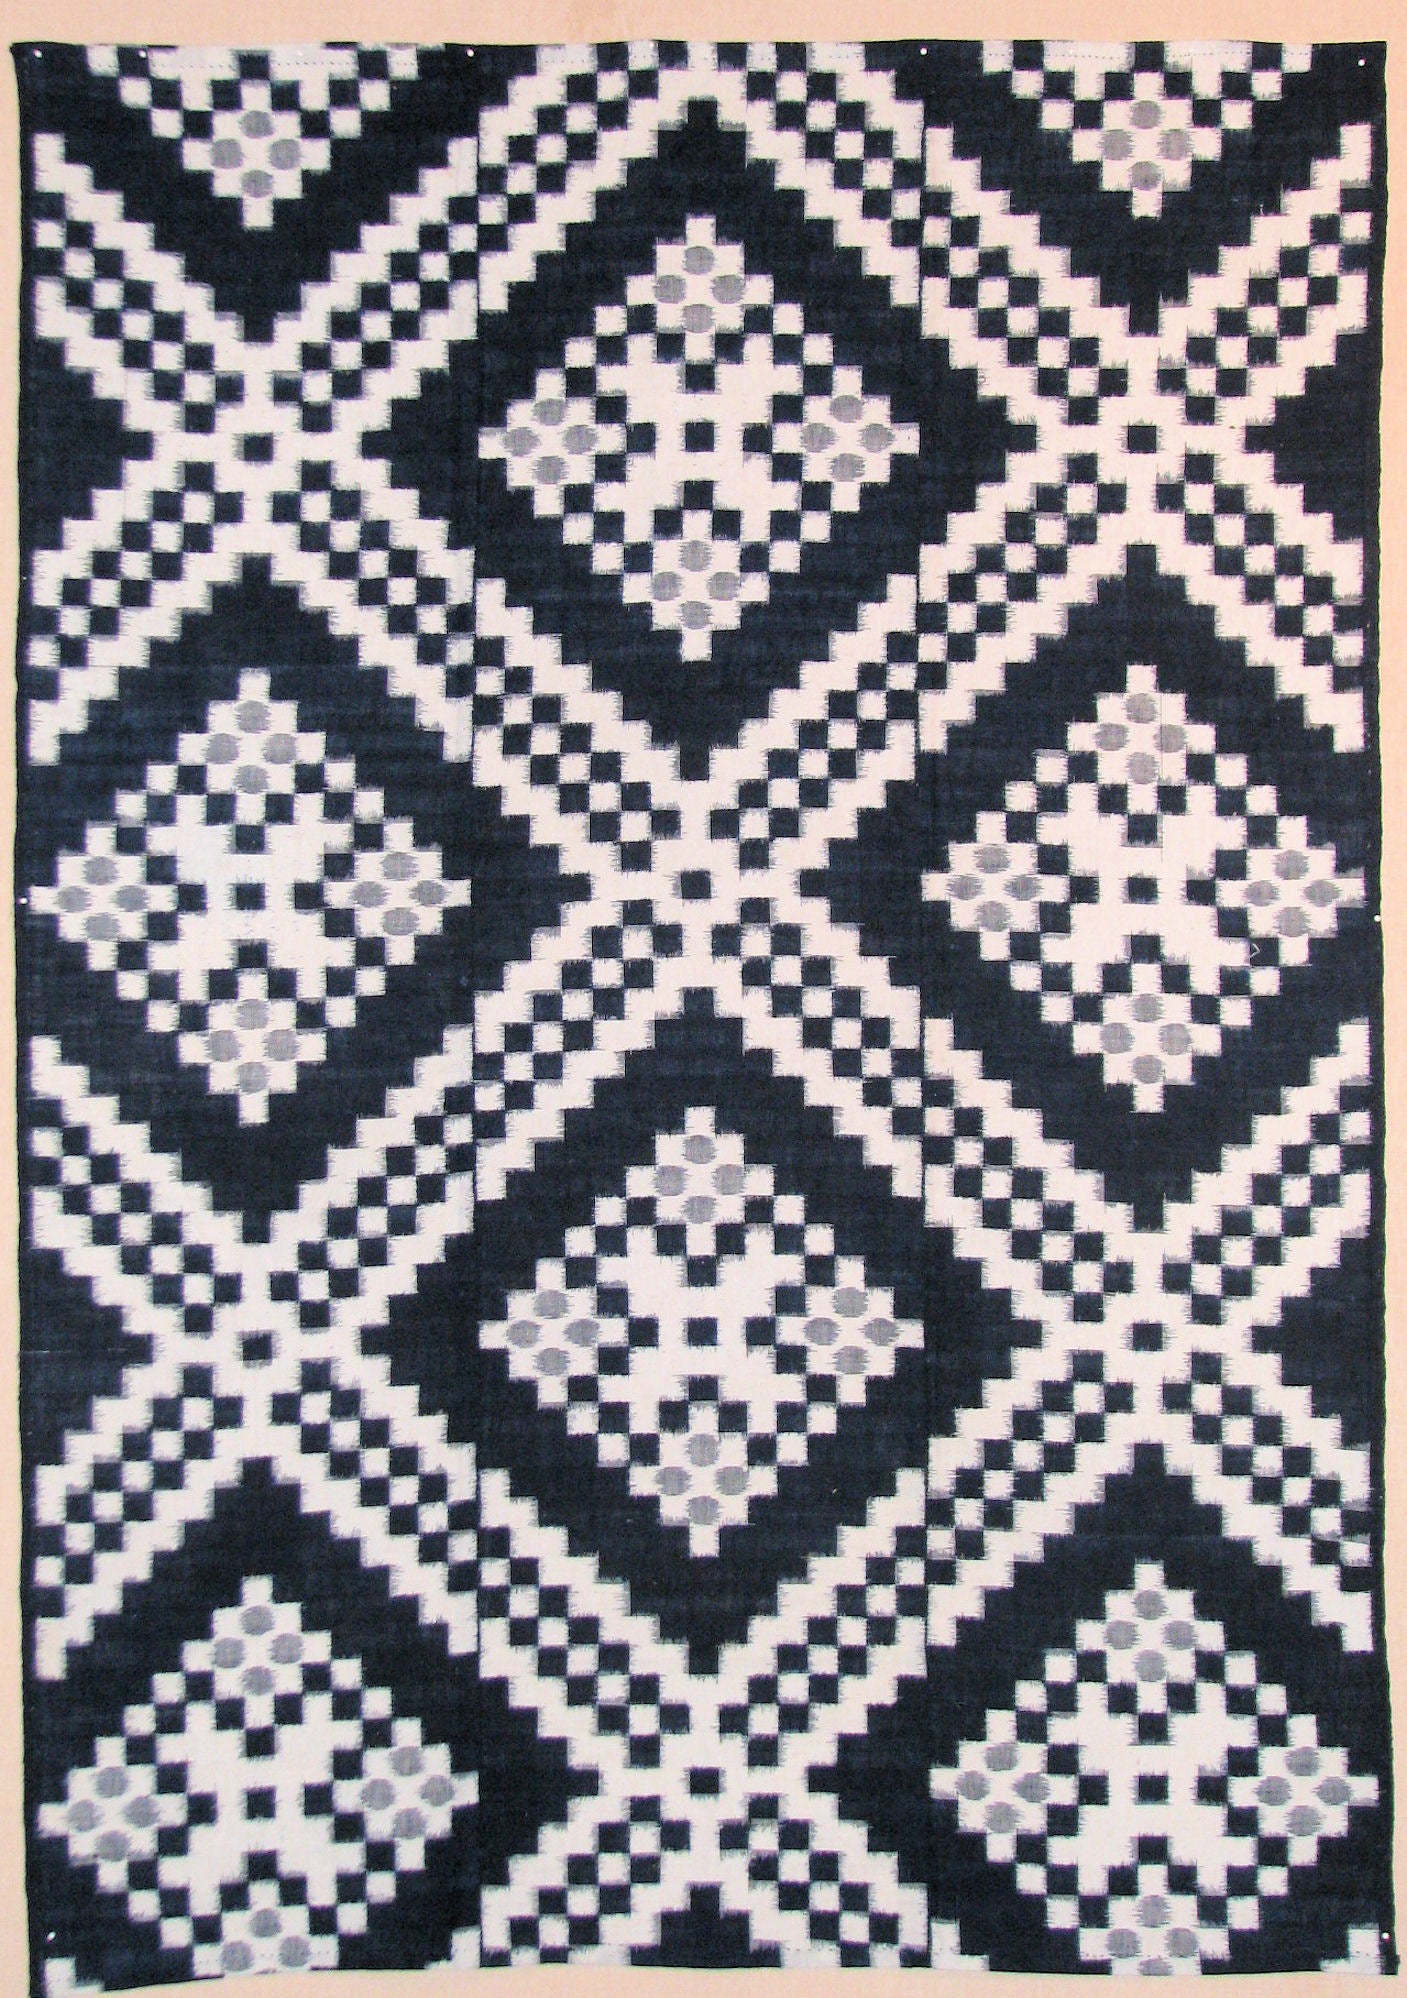 Early 20th century Japanese cotton ikat futon cover with squares.